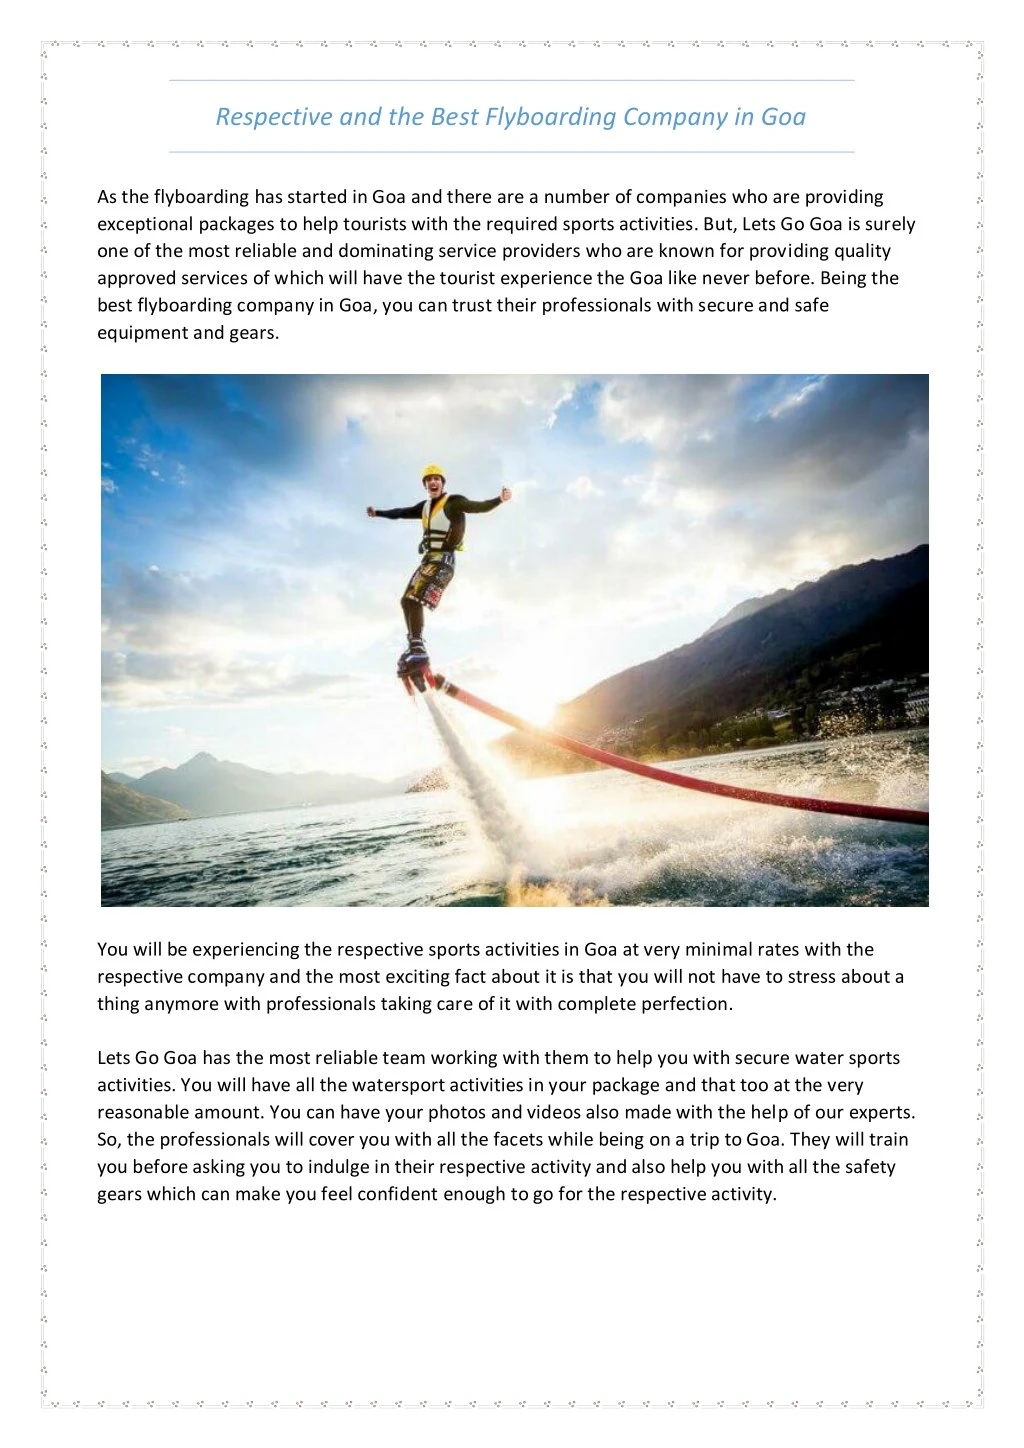 respective and the best flyboarding company in goa